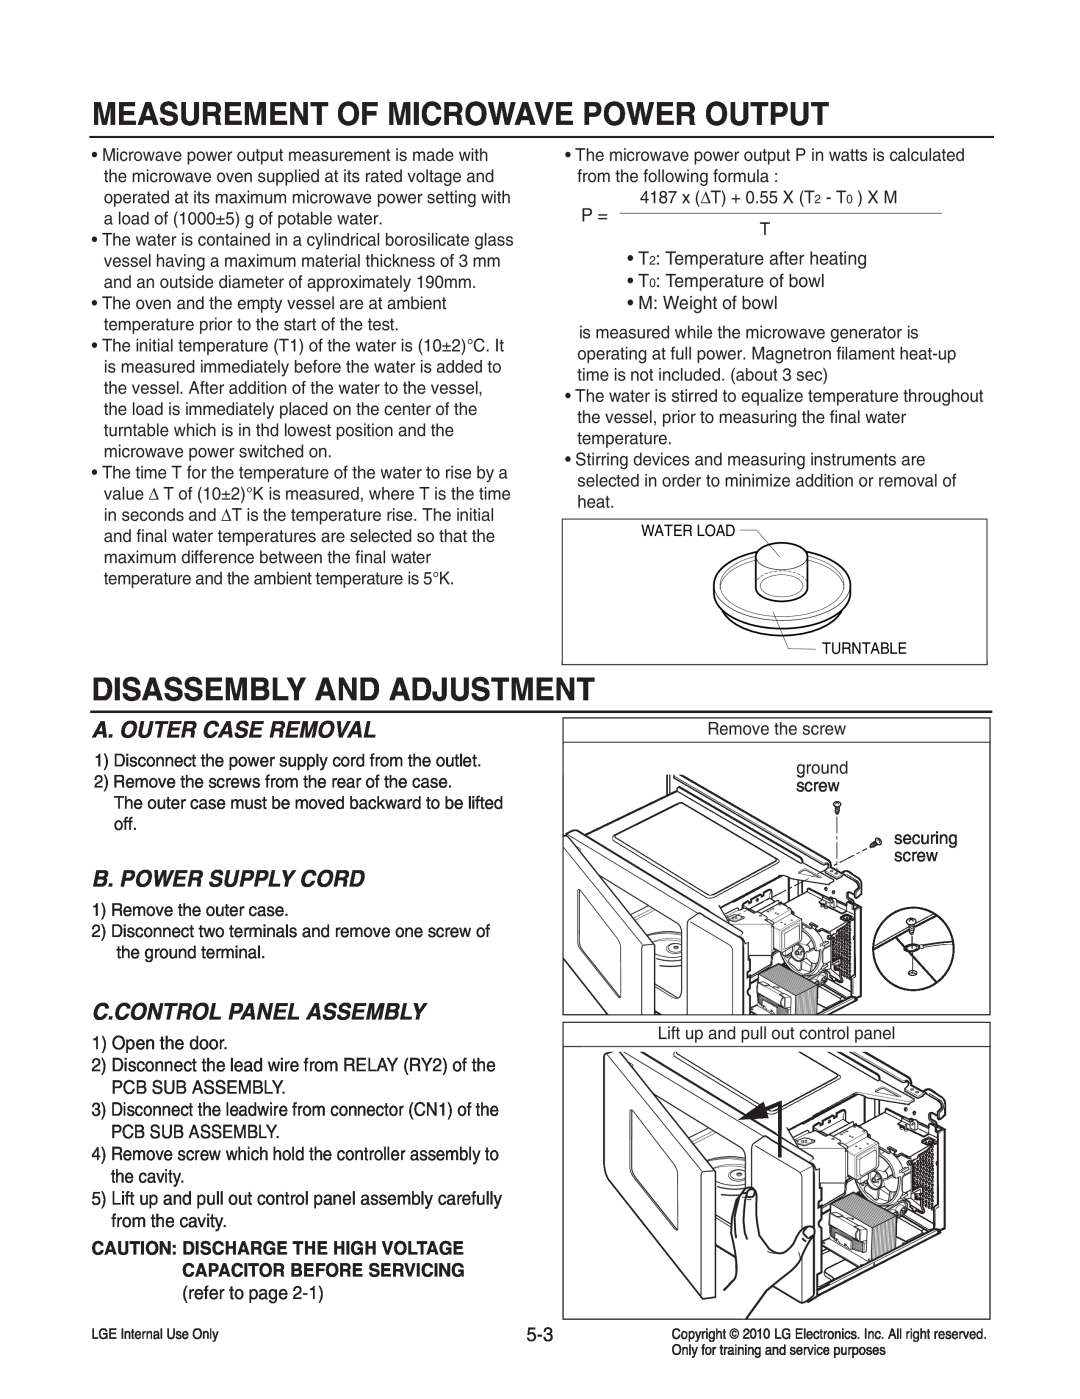 Frigidaire LCRT2010ST service manual Measurement Of Microwave Power Output, Disassembly And Adjustment, Pcb Sub Assembly 